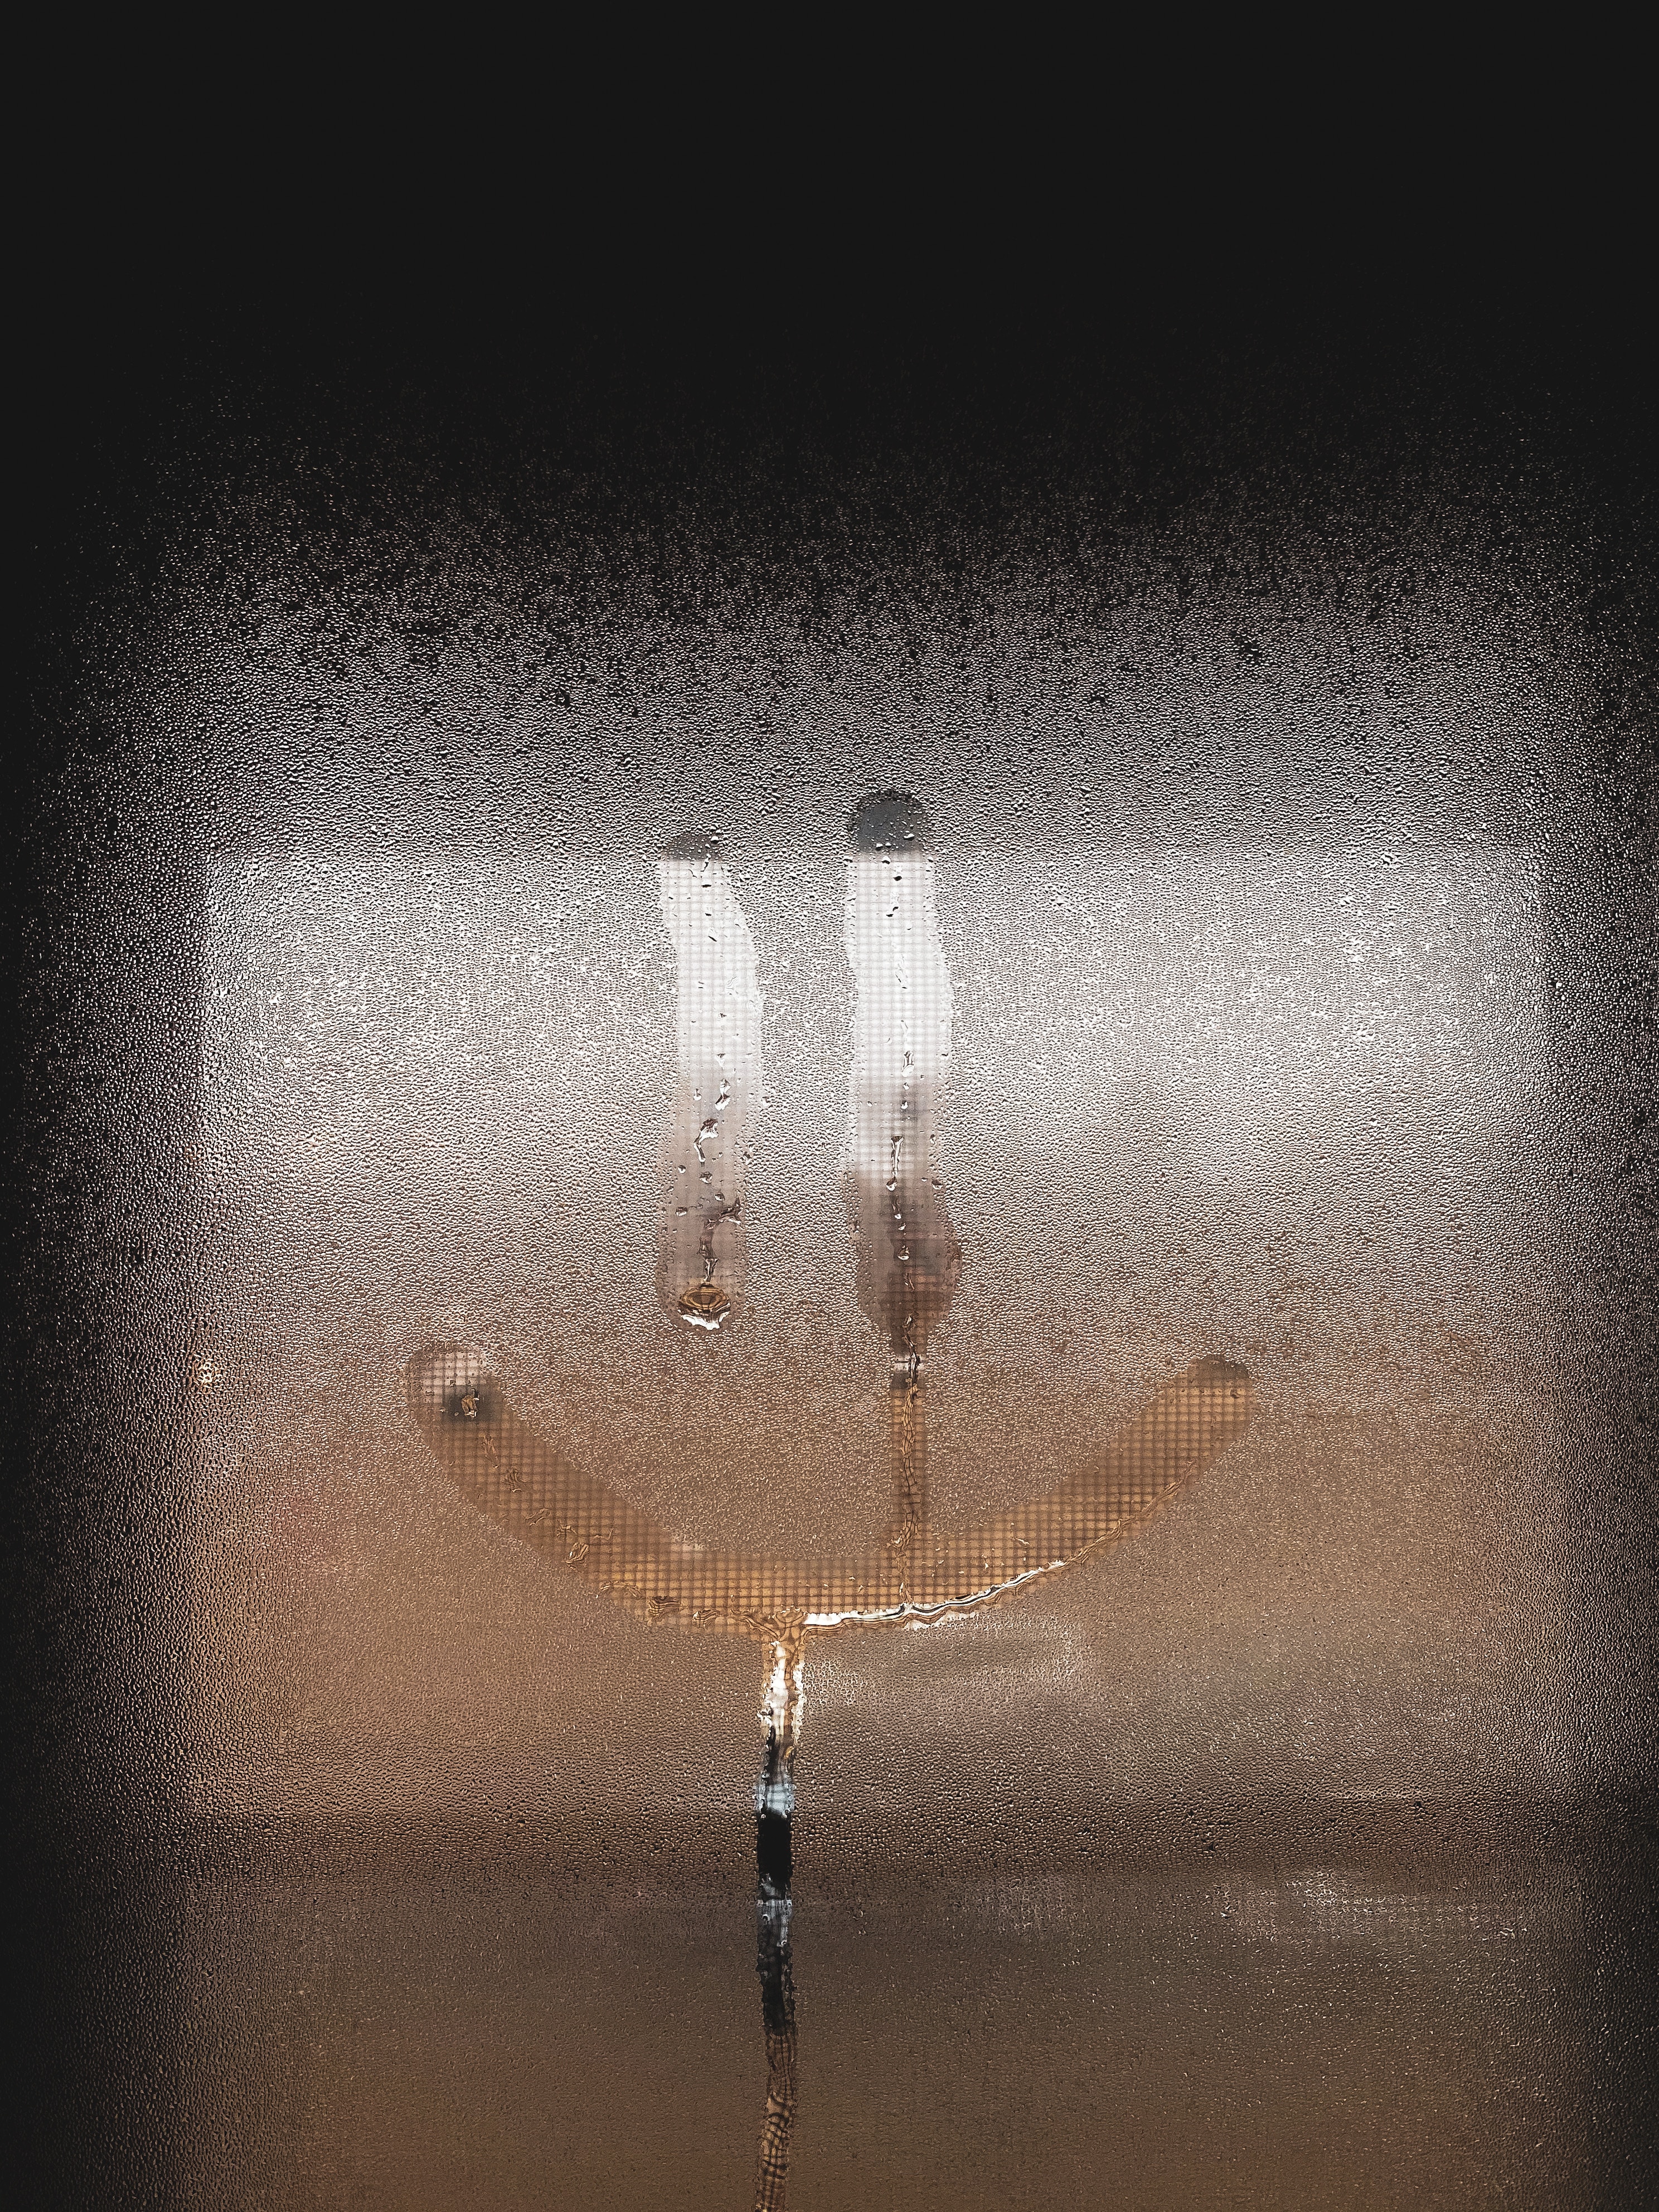 91599 Screensavers and Wallpapers Smiley for phone. Download glass, smile, drops, miscellanea, miscellaneous, wet, window, emoticon, smiley pictures for free